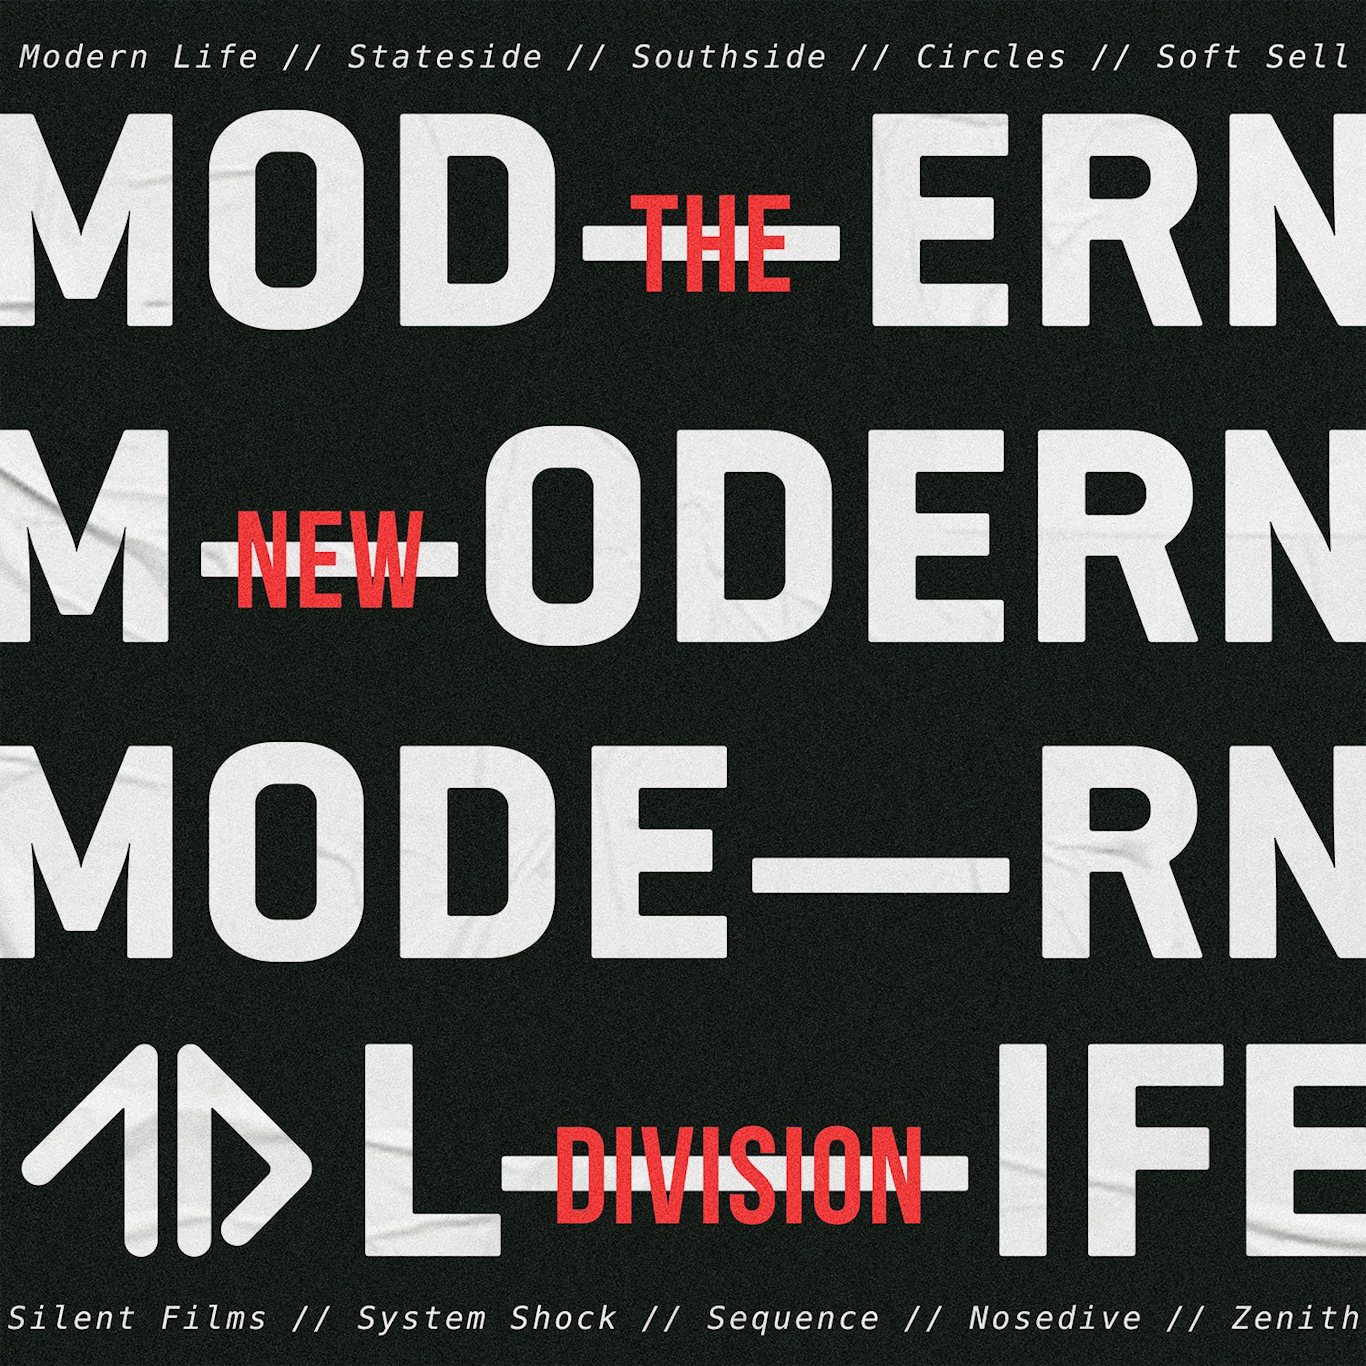 The New Division – Modern Life